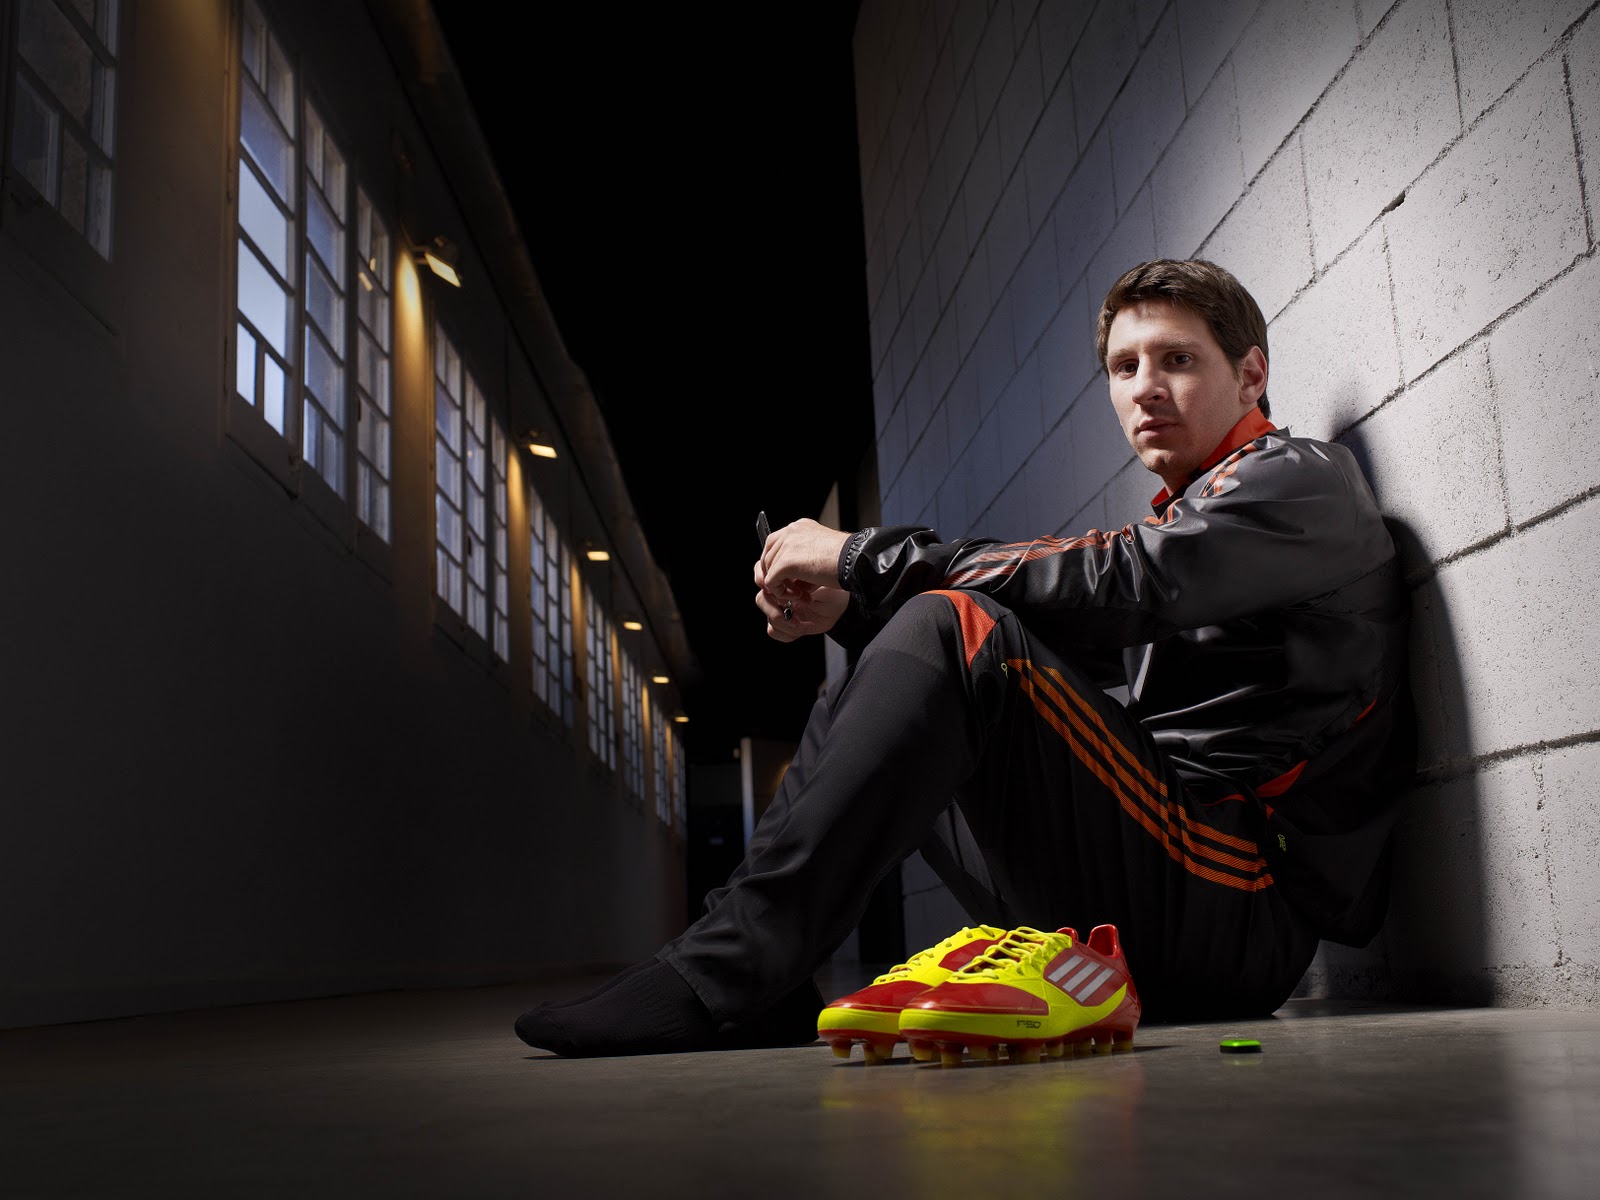 DISKIOFF: adidas launches adizero - The World's First Boot with a Brain